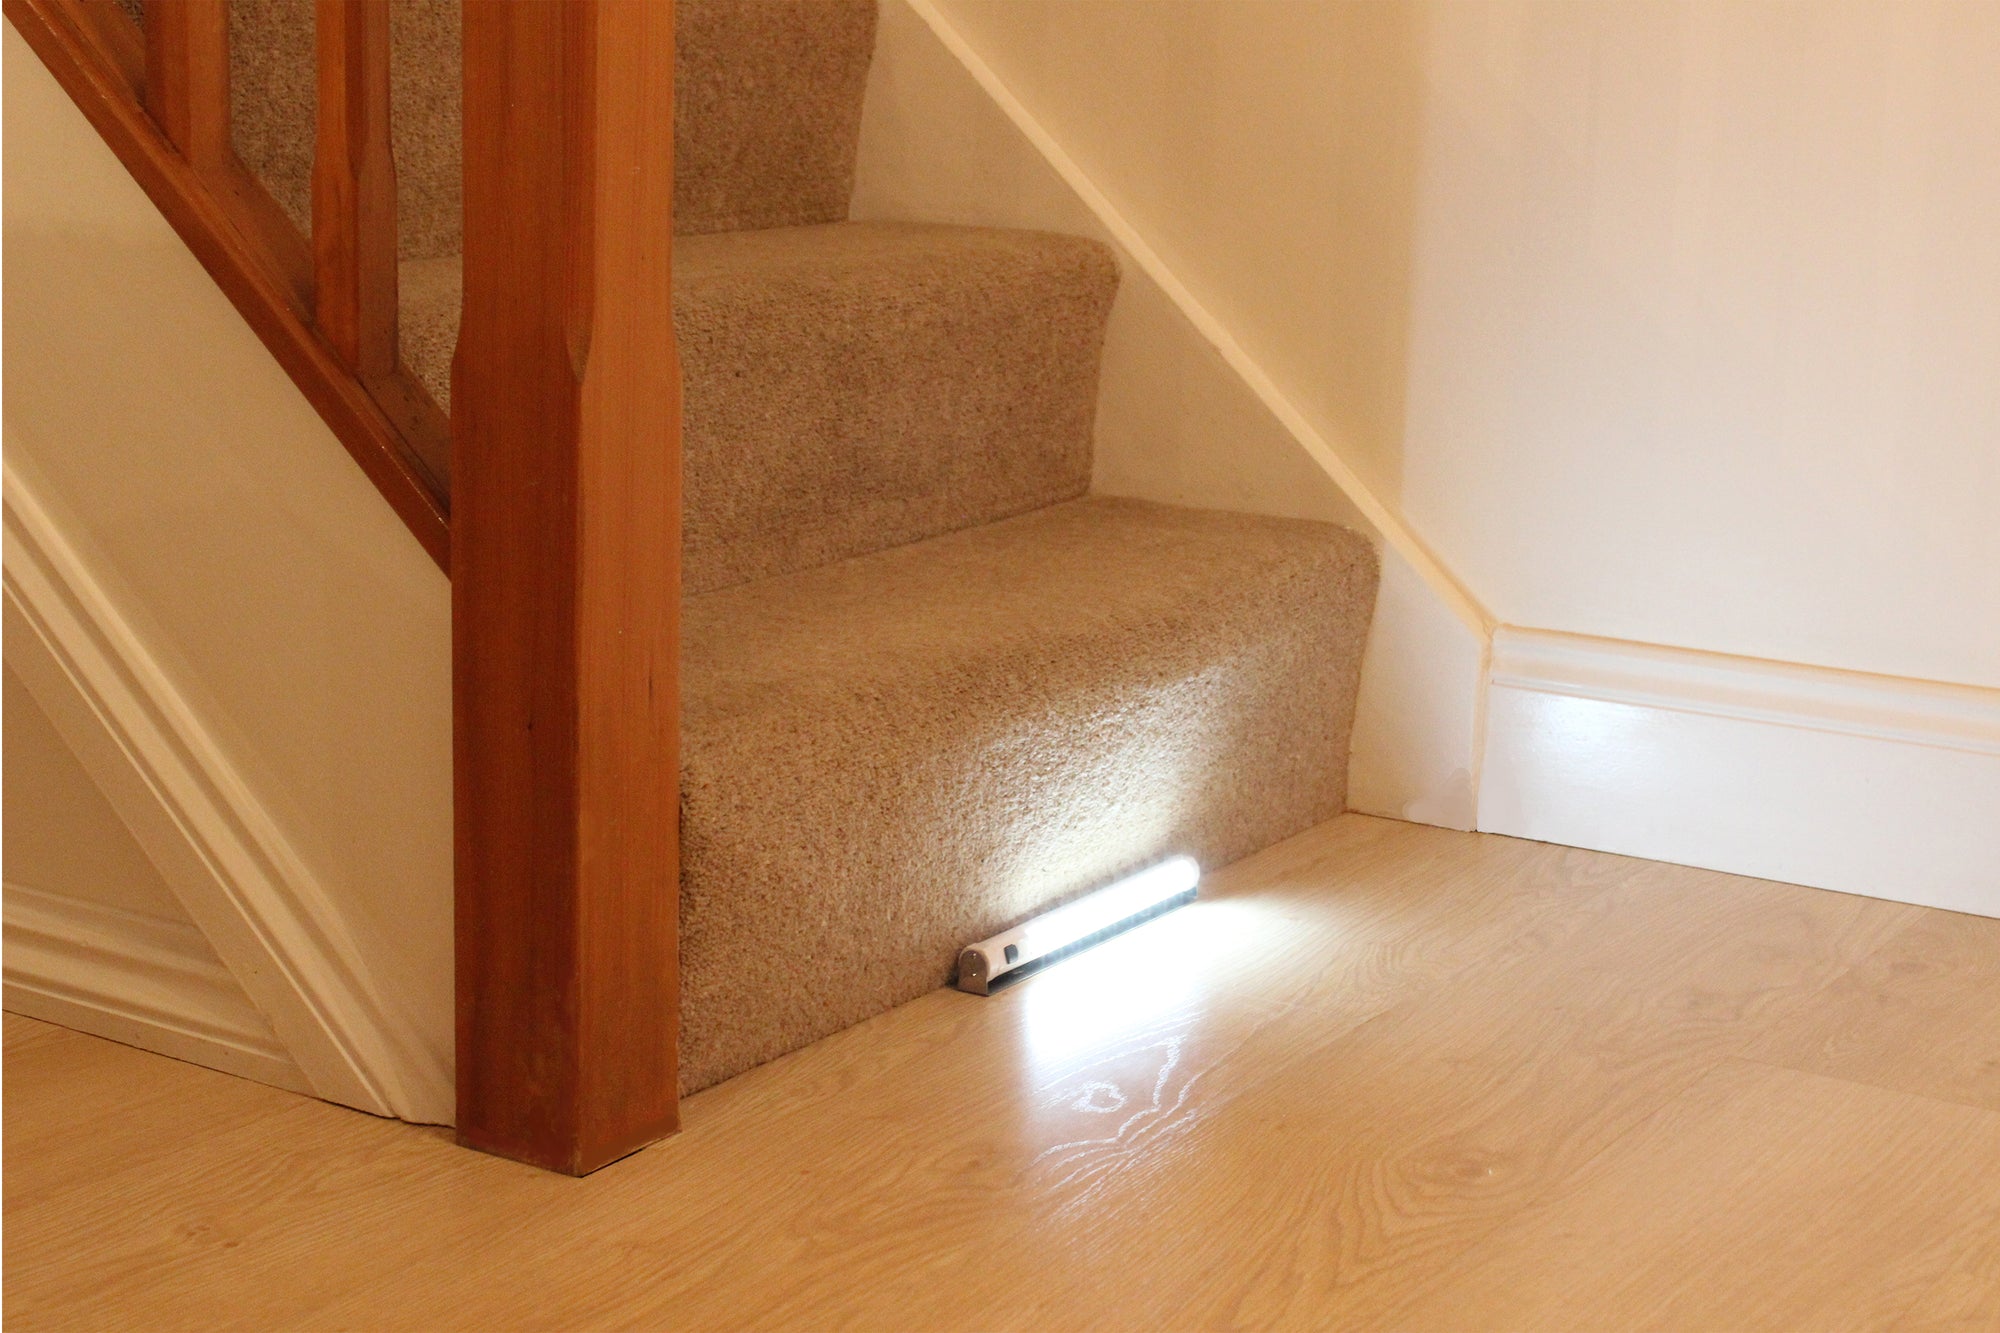 In the middle of the picture, the bottom of a flight of beige-carpeted stairs with wooden bannisters is visible. The setting is a domestic interior with white wall and laminate flooring. Only the first three stairs are shown and they are seen from a side/front angle.  A tubular illuminated light is positioned on the laminate flooring so that it sits firmly against the middle of the bottom stair.